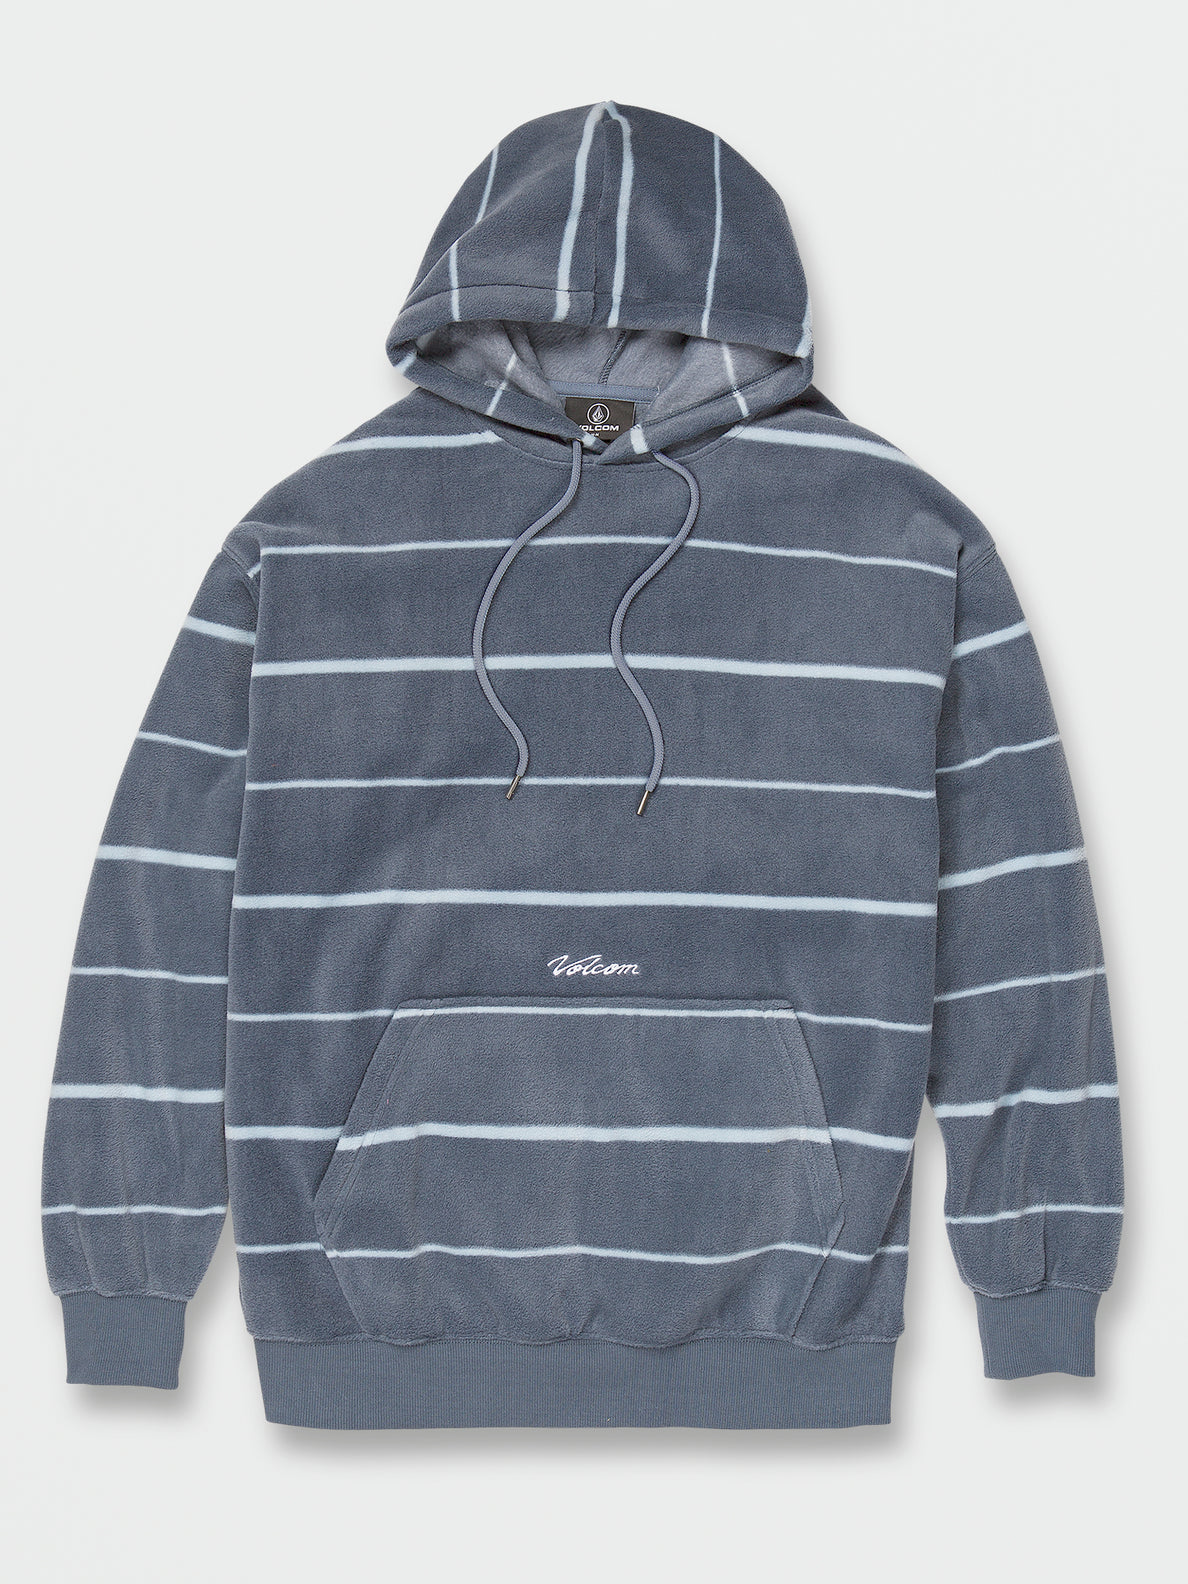 Throw Exceptions Pullover Hoodie - Slate Blue